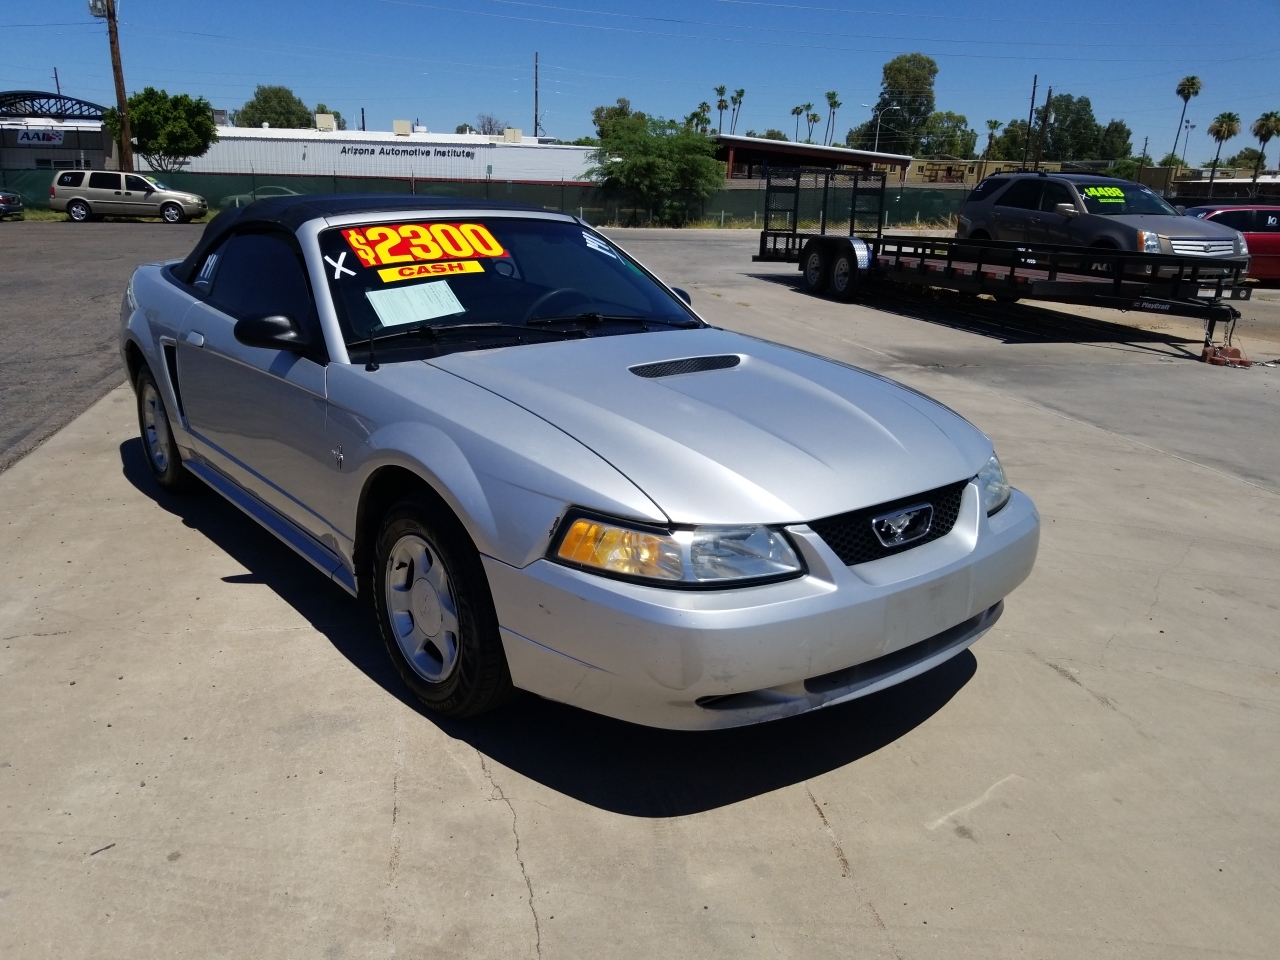 Used 2000 Ford Mustang Convertible For Sale In Phoenix Az